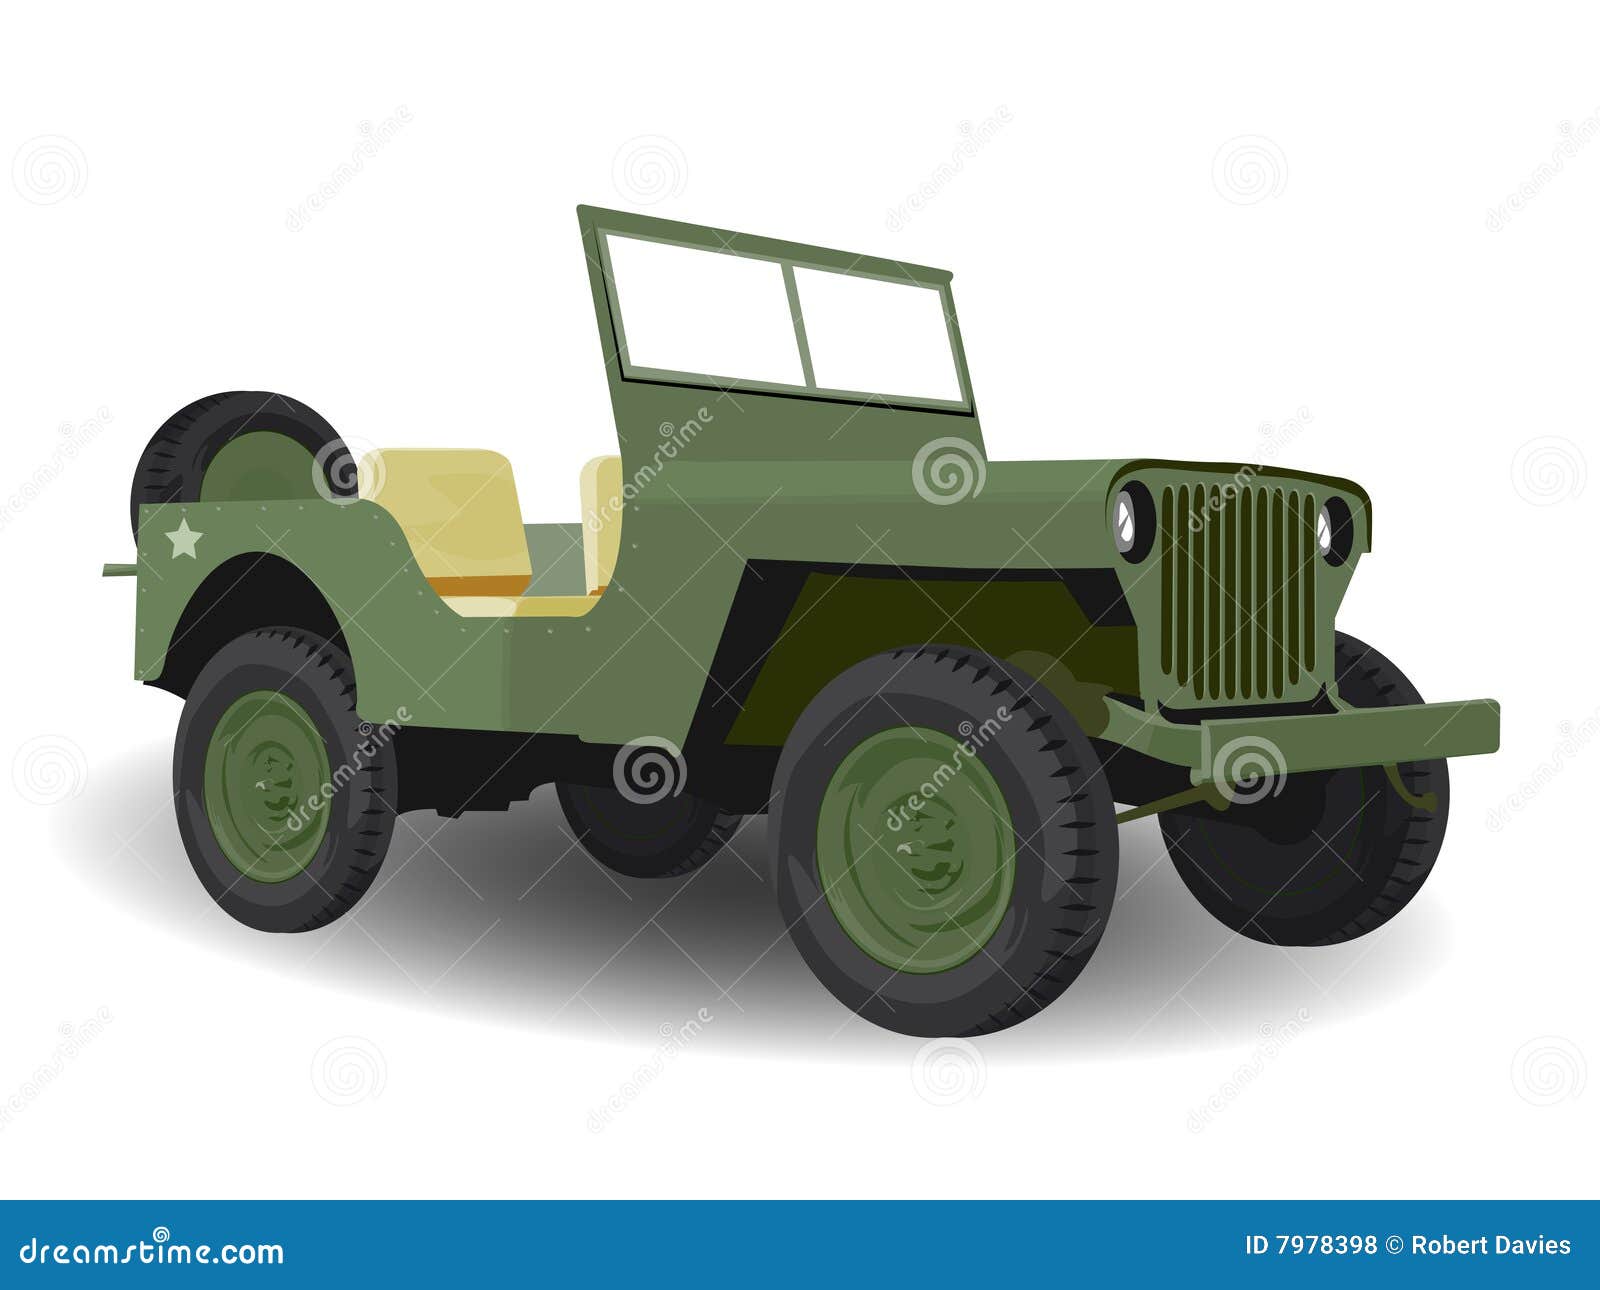 Green Army Jeep Vehicle stock vector. Illustration of jeep - 7978398